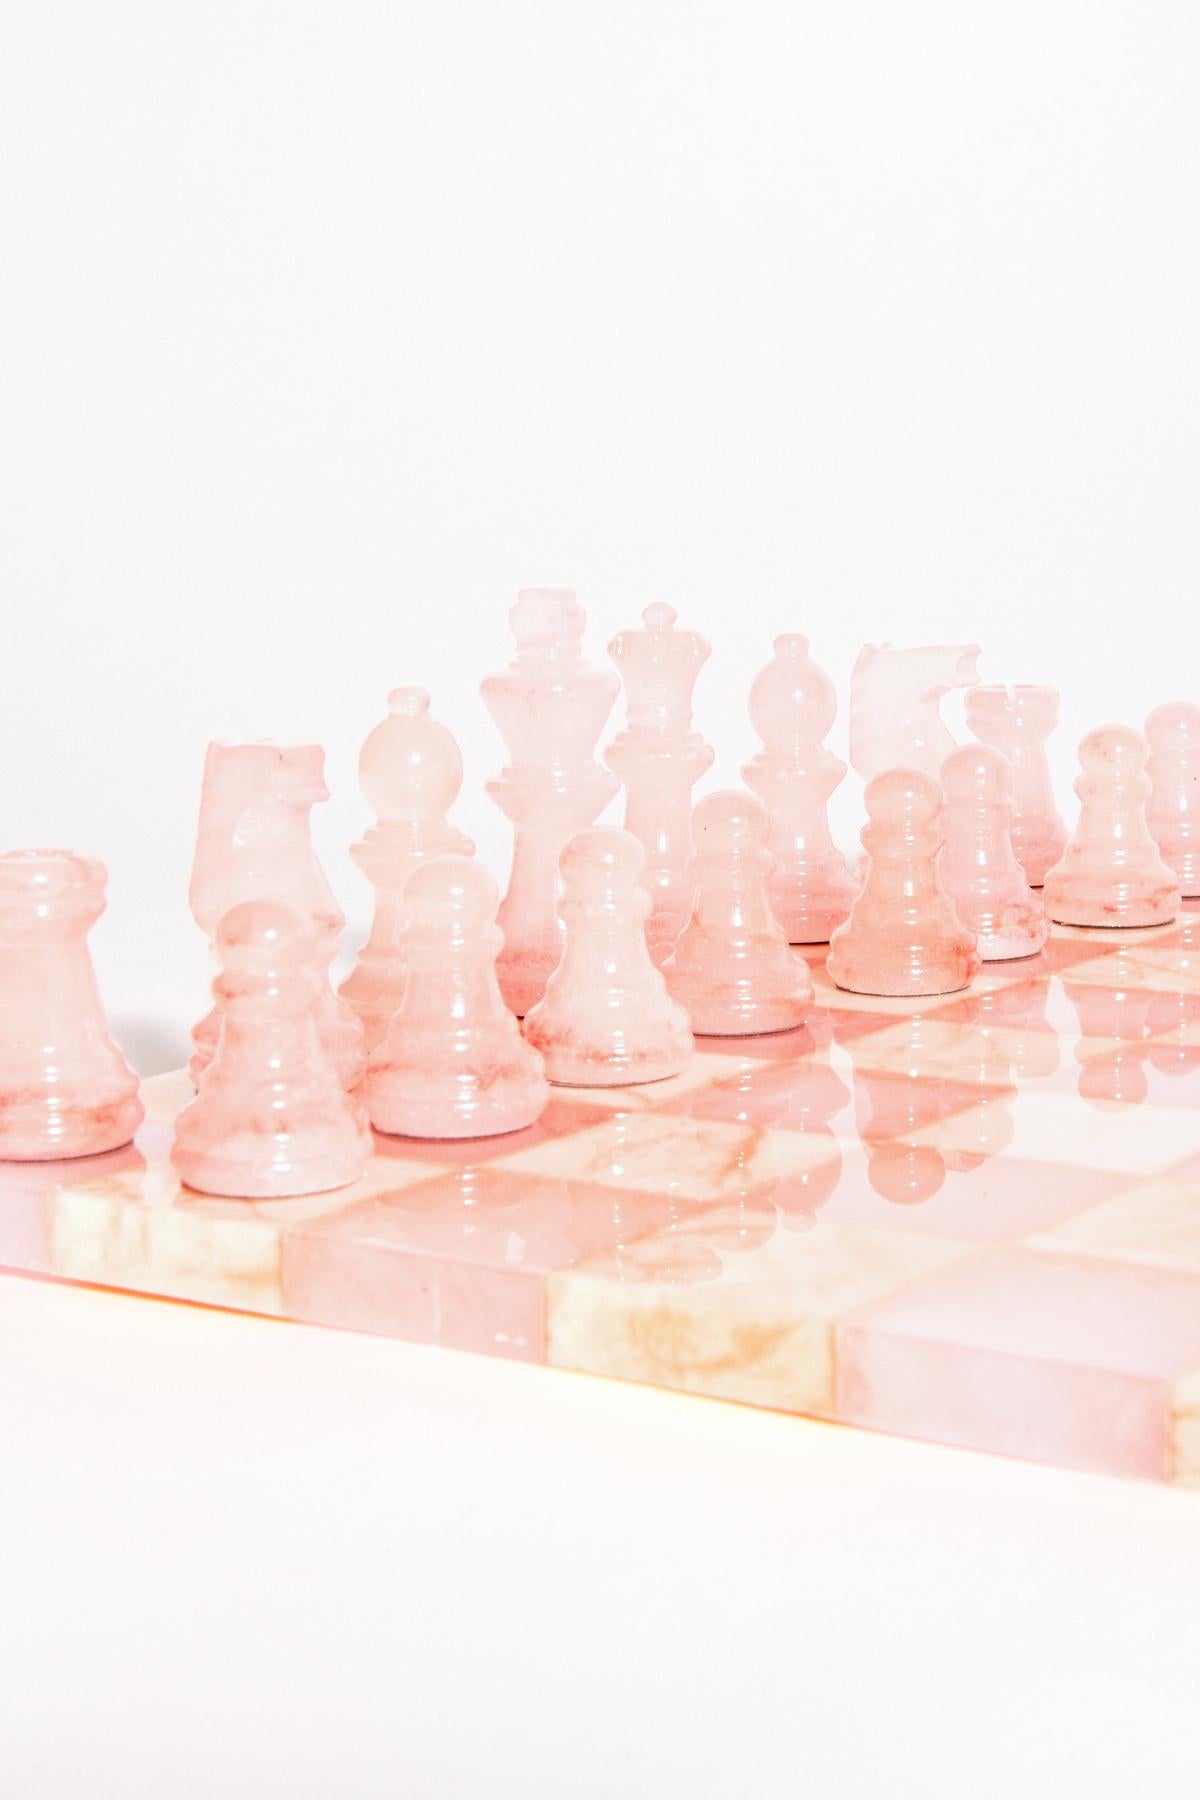 Contemporary Italian Pale Pink/Peach Large Alabaster Chess Set For Sale